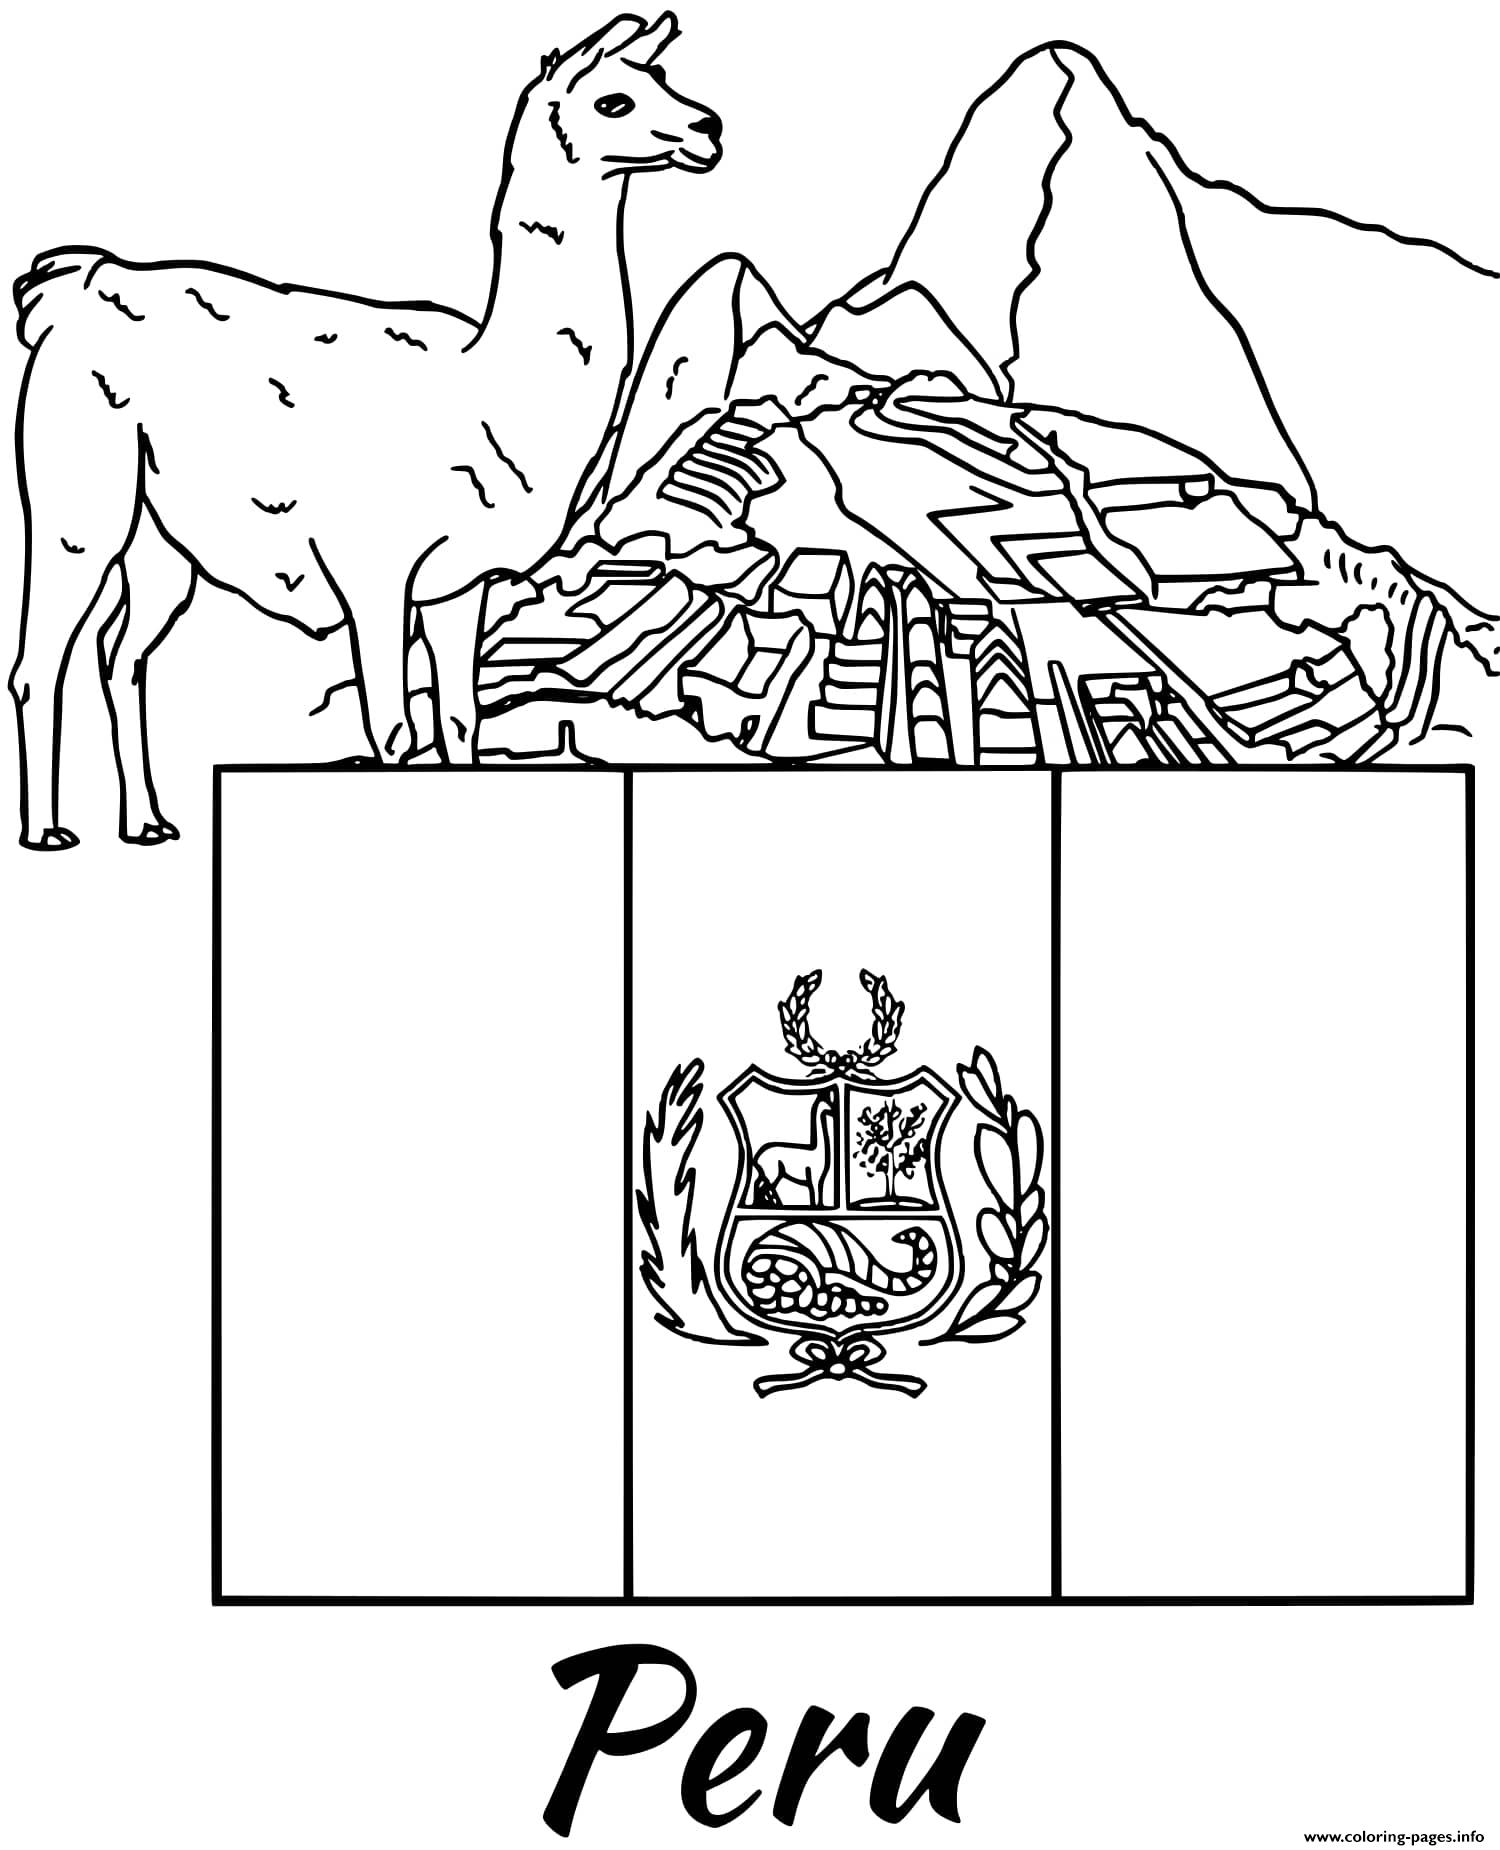 Alpaca Coloring Pages - Coloring Home